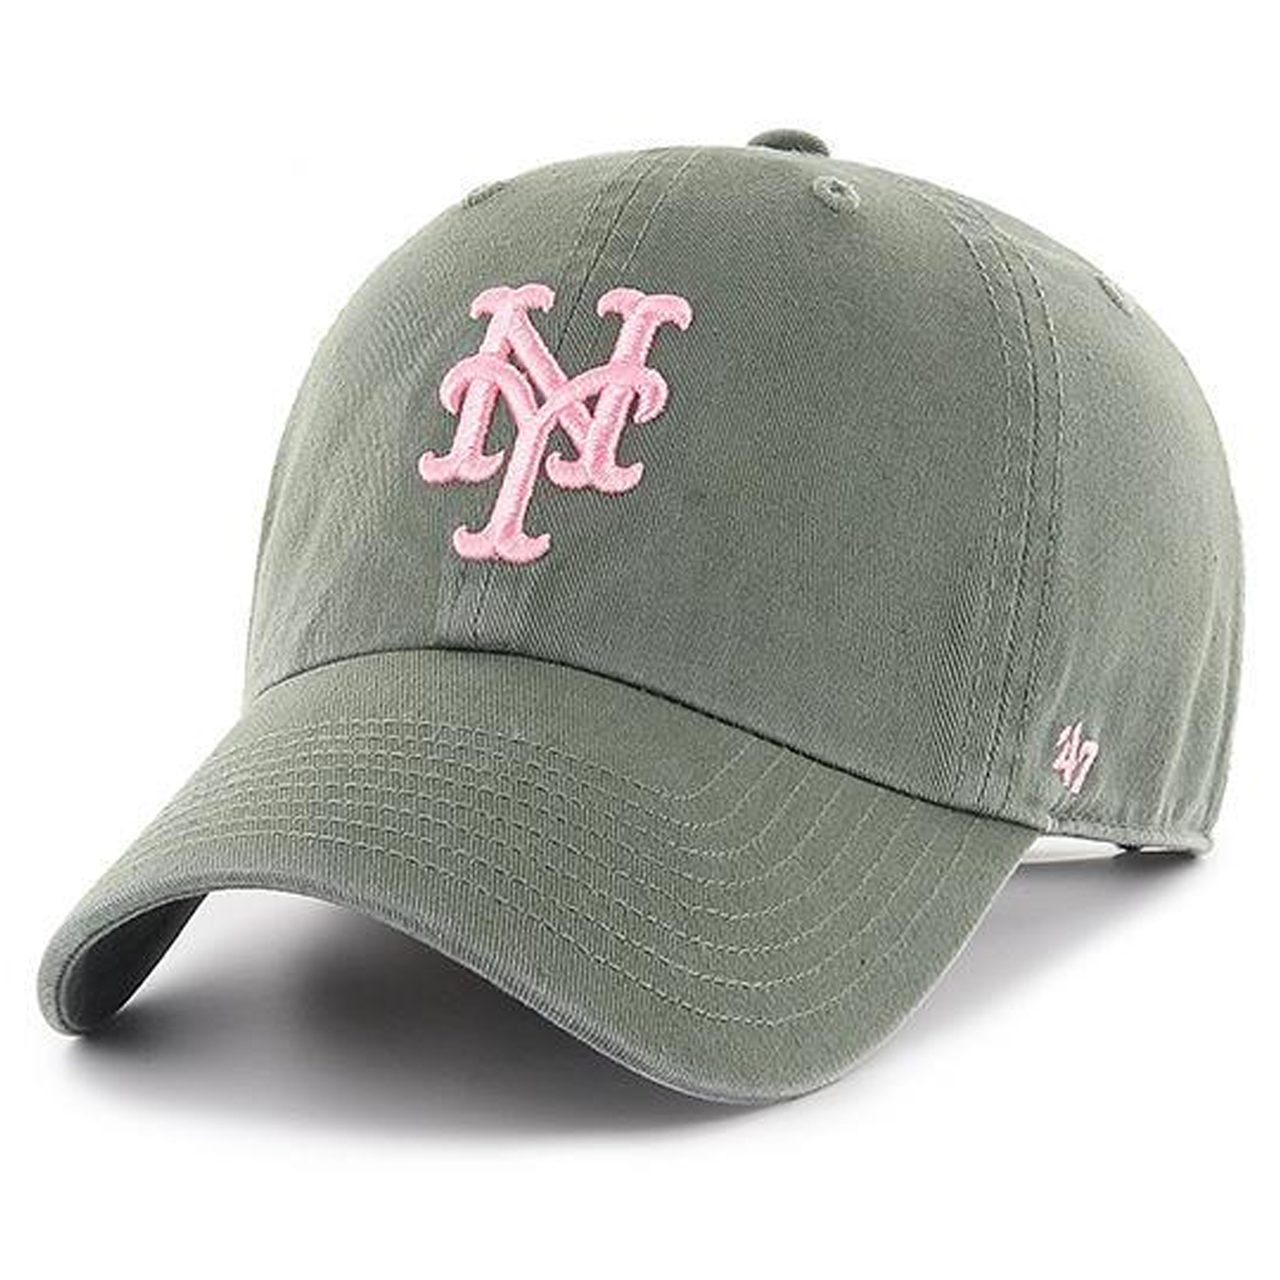 on the front of the new york mets olive women's dad hat is the new york mets logo embroidered in pink